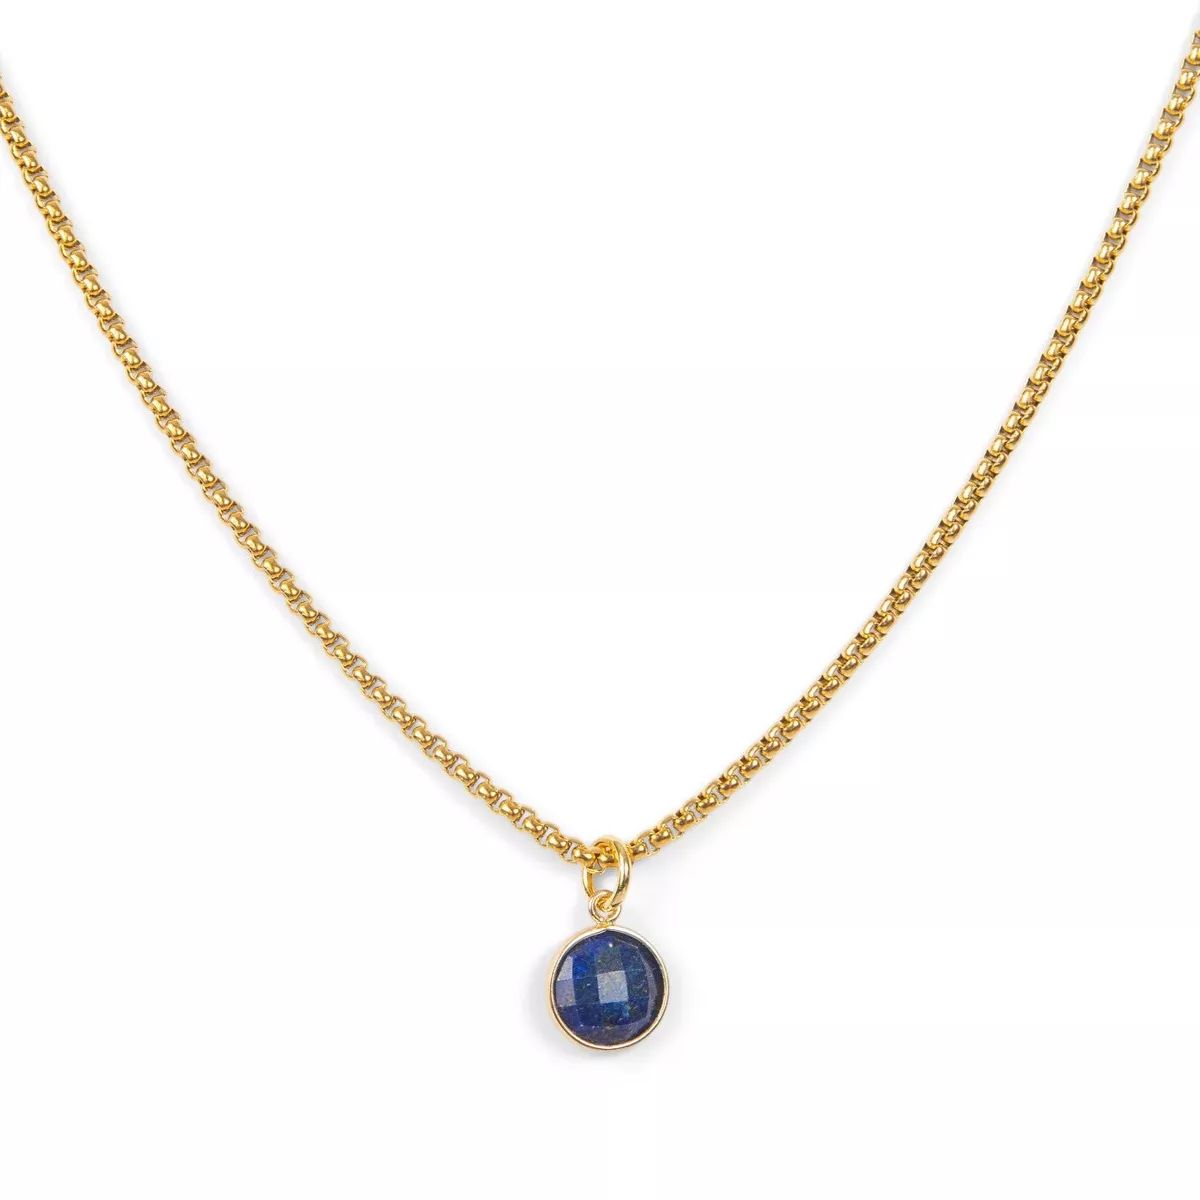 Gold Plated Lapis Stone Pendant Necklace | ETHICGOODS | Target